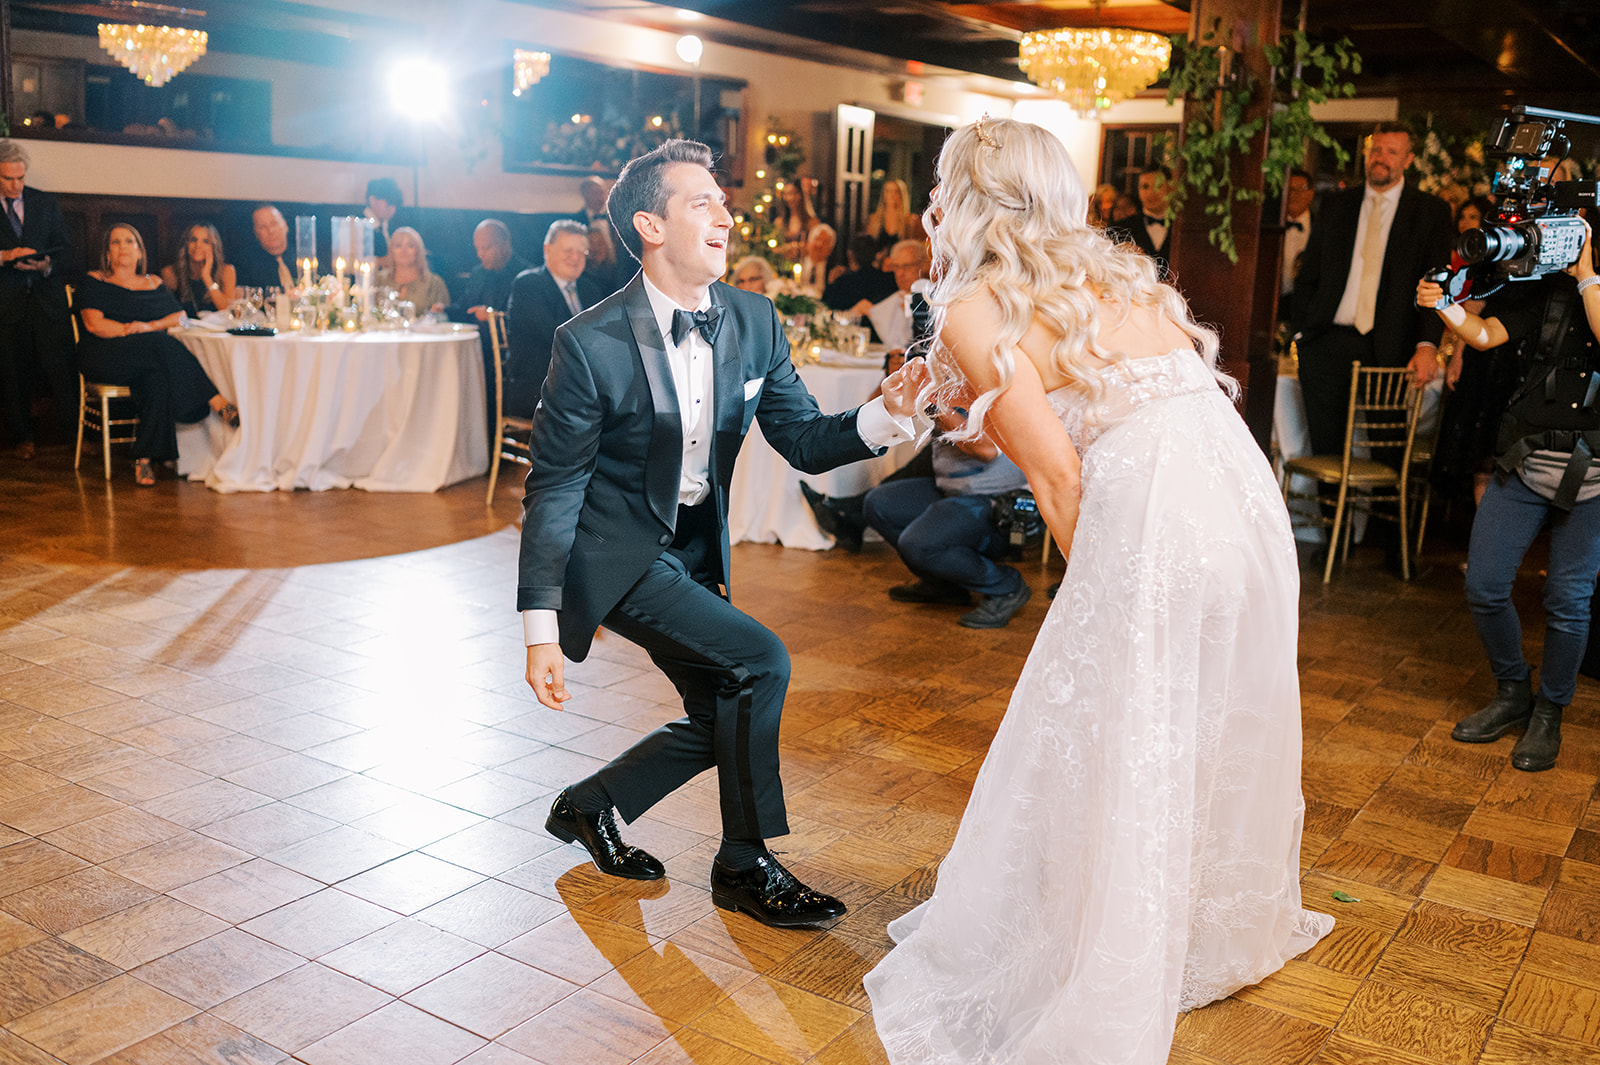 groom showing off his dance moves as bride laughs 